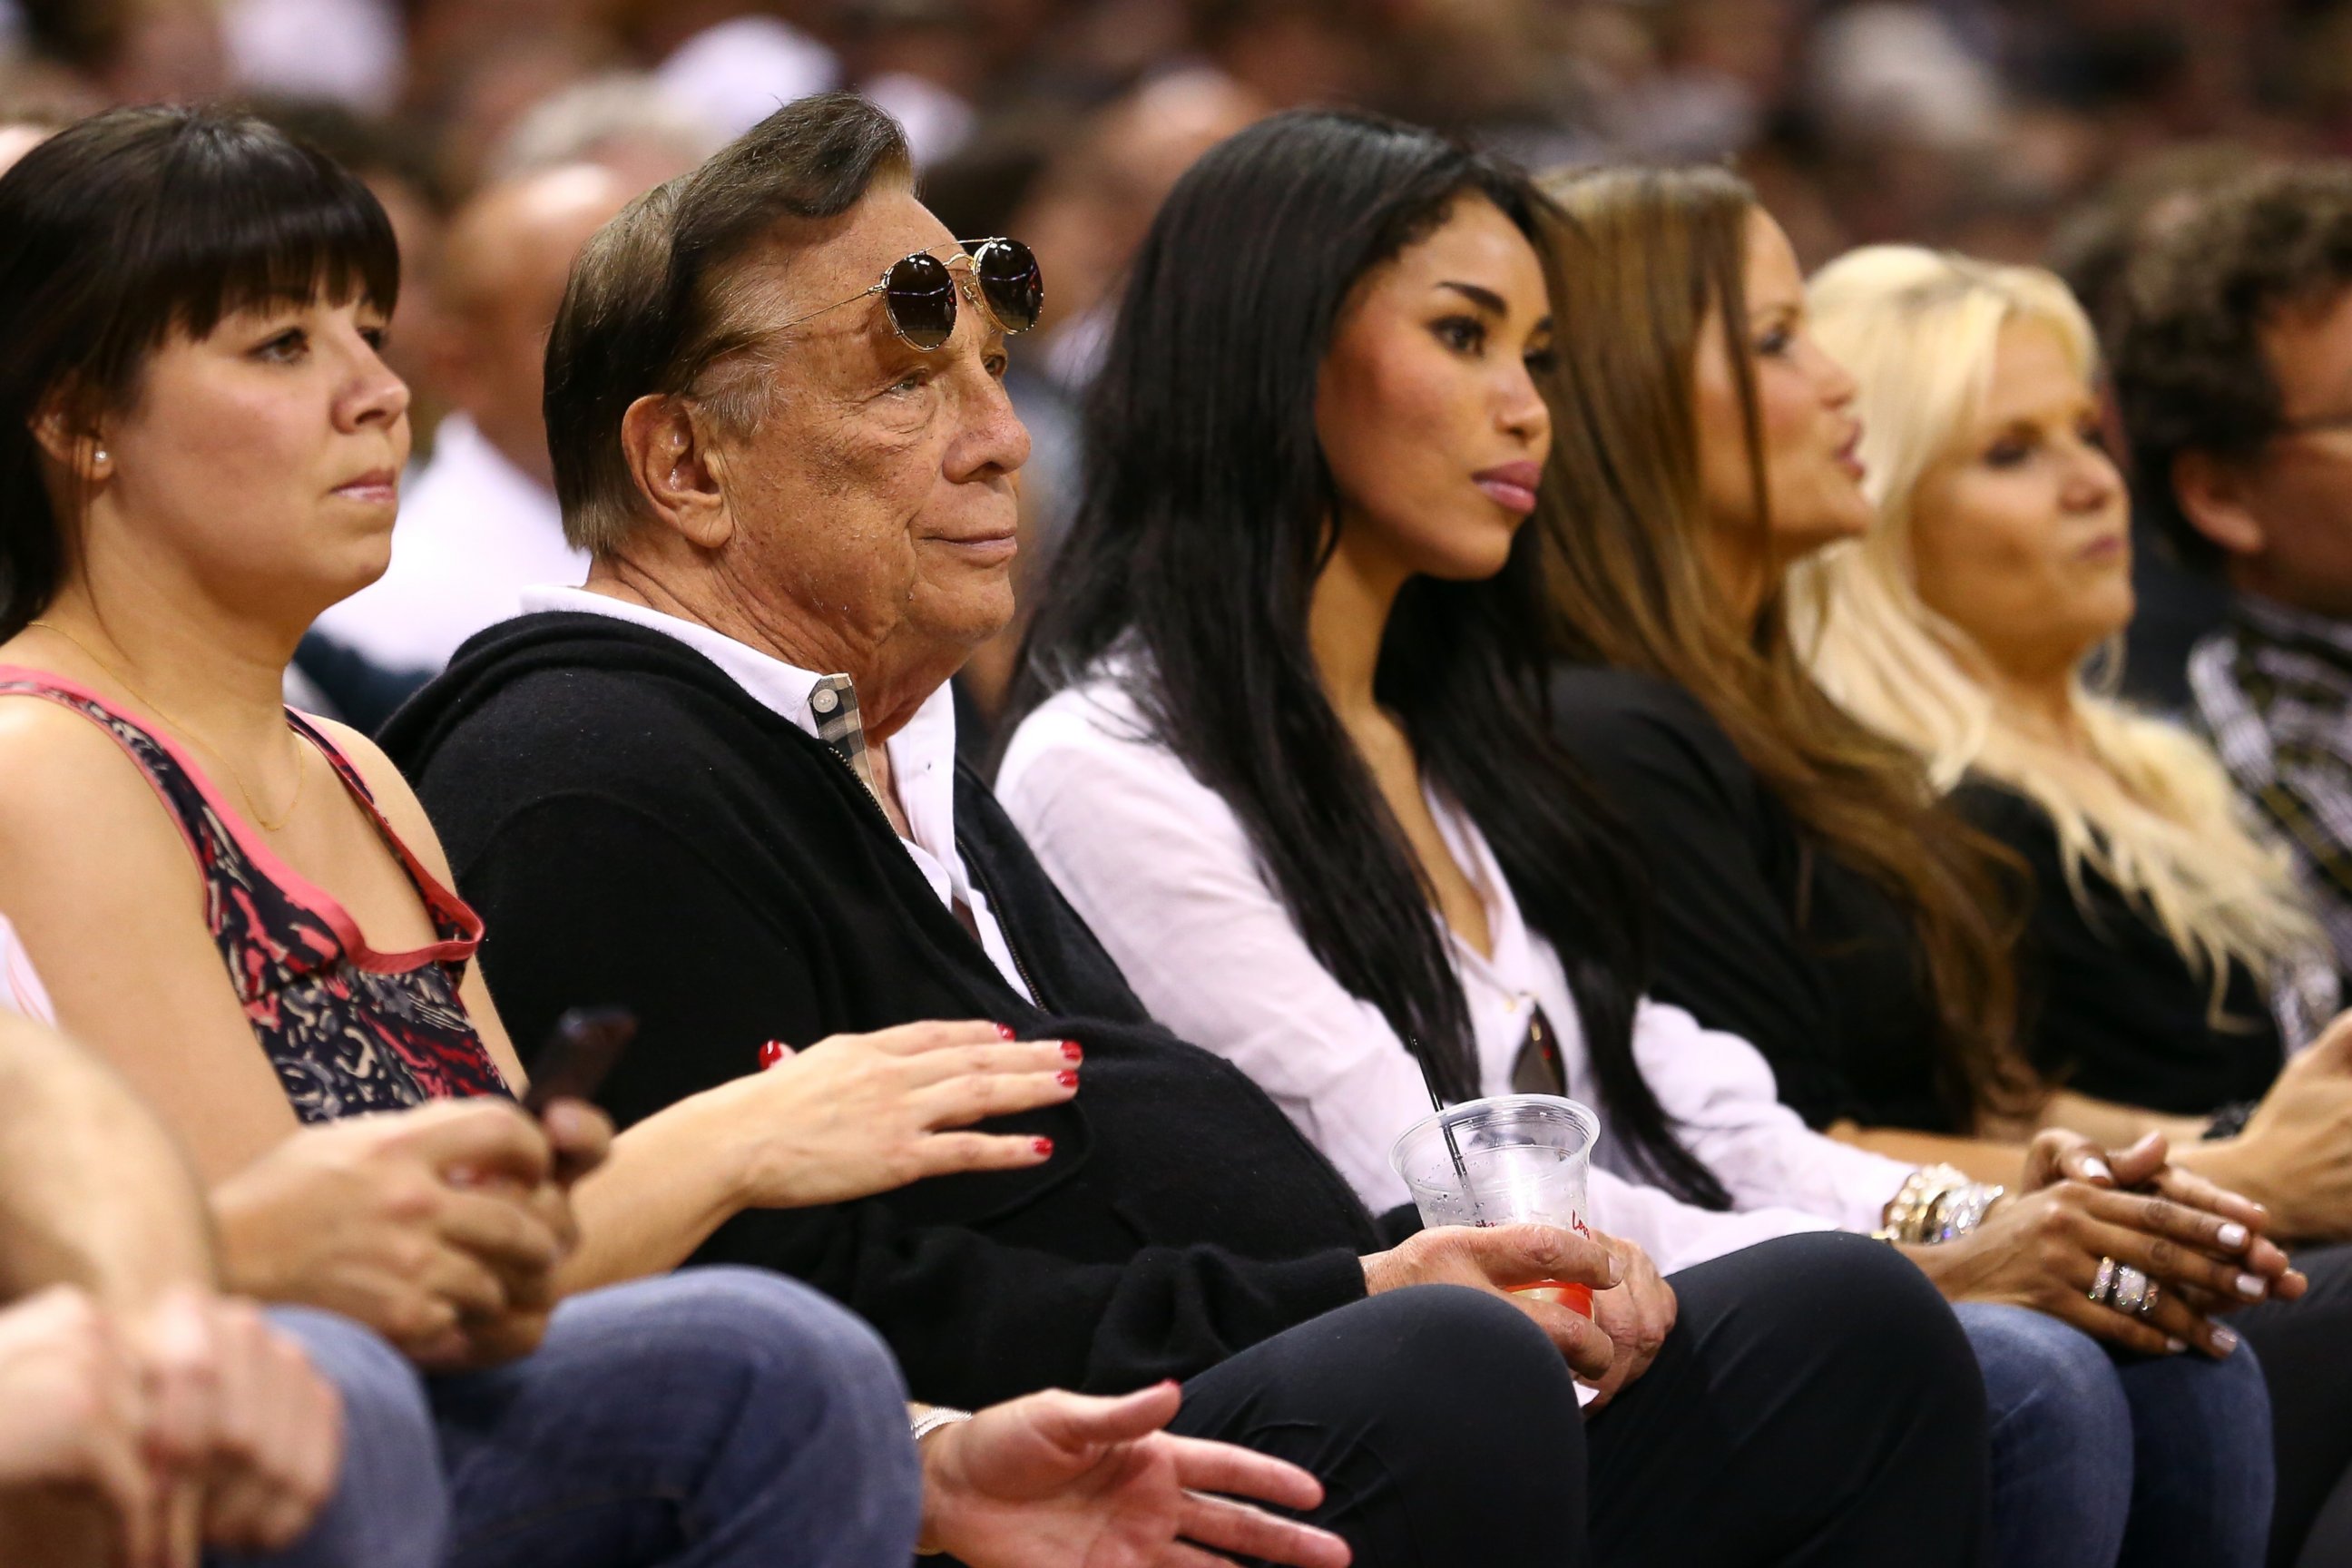 PHOTO: Team owner Donald Sterling of the Los Angeles Clippers and V. Stiviano watch the San Antonio Spurs play  on May 19, 2013 in San Antonio, Texas.  